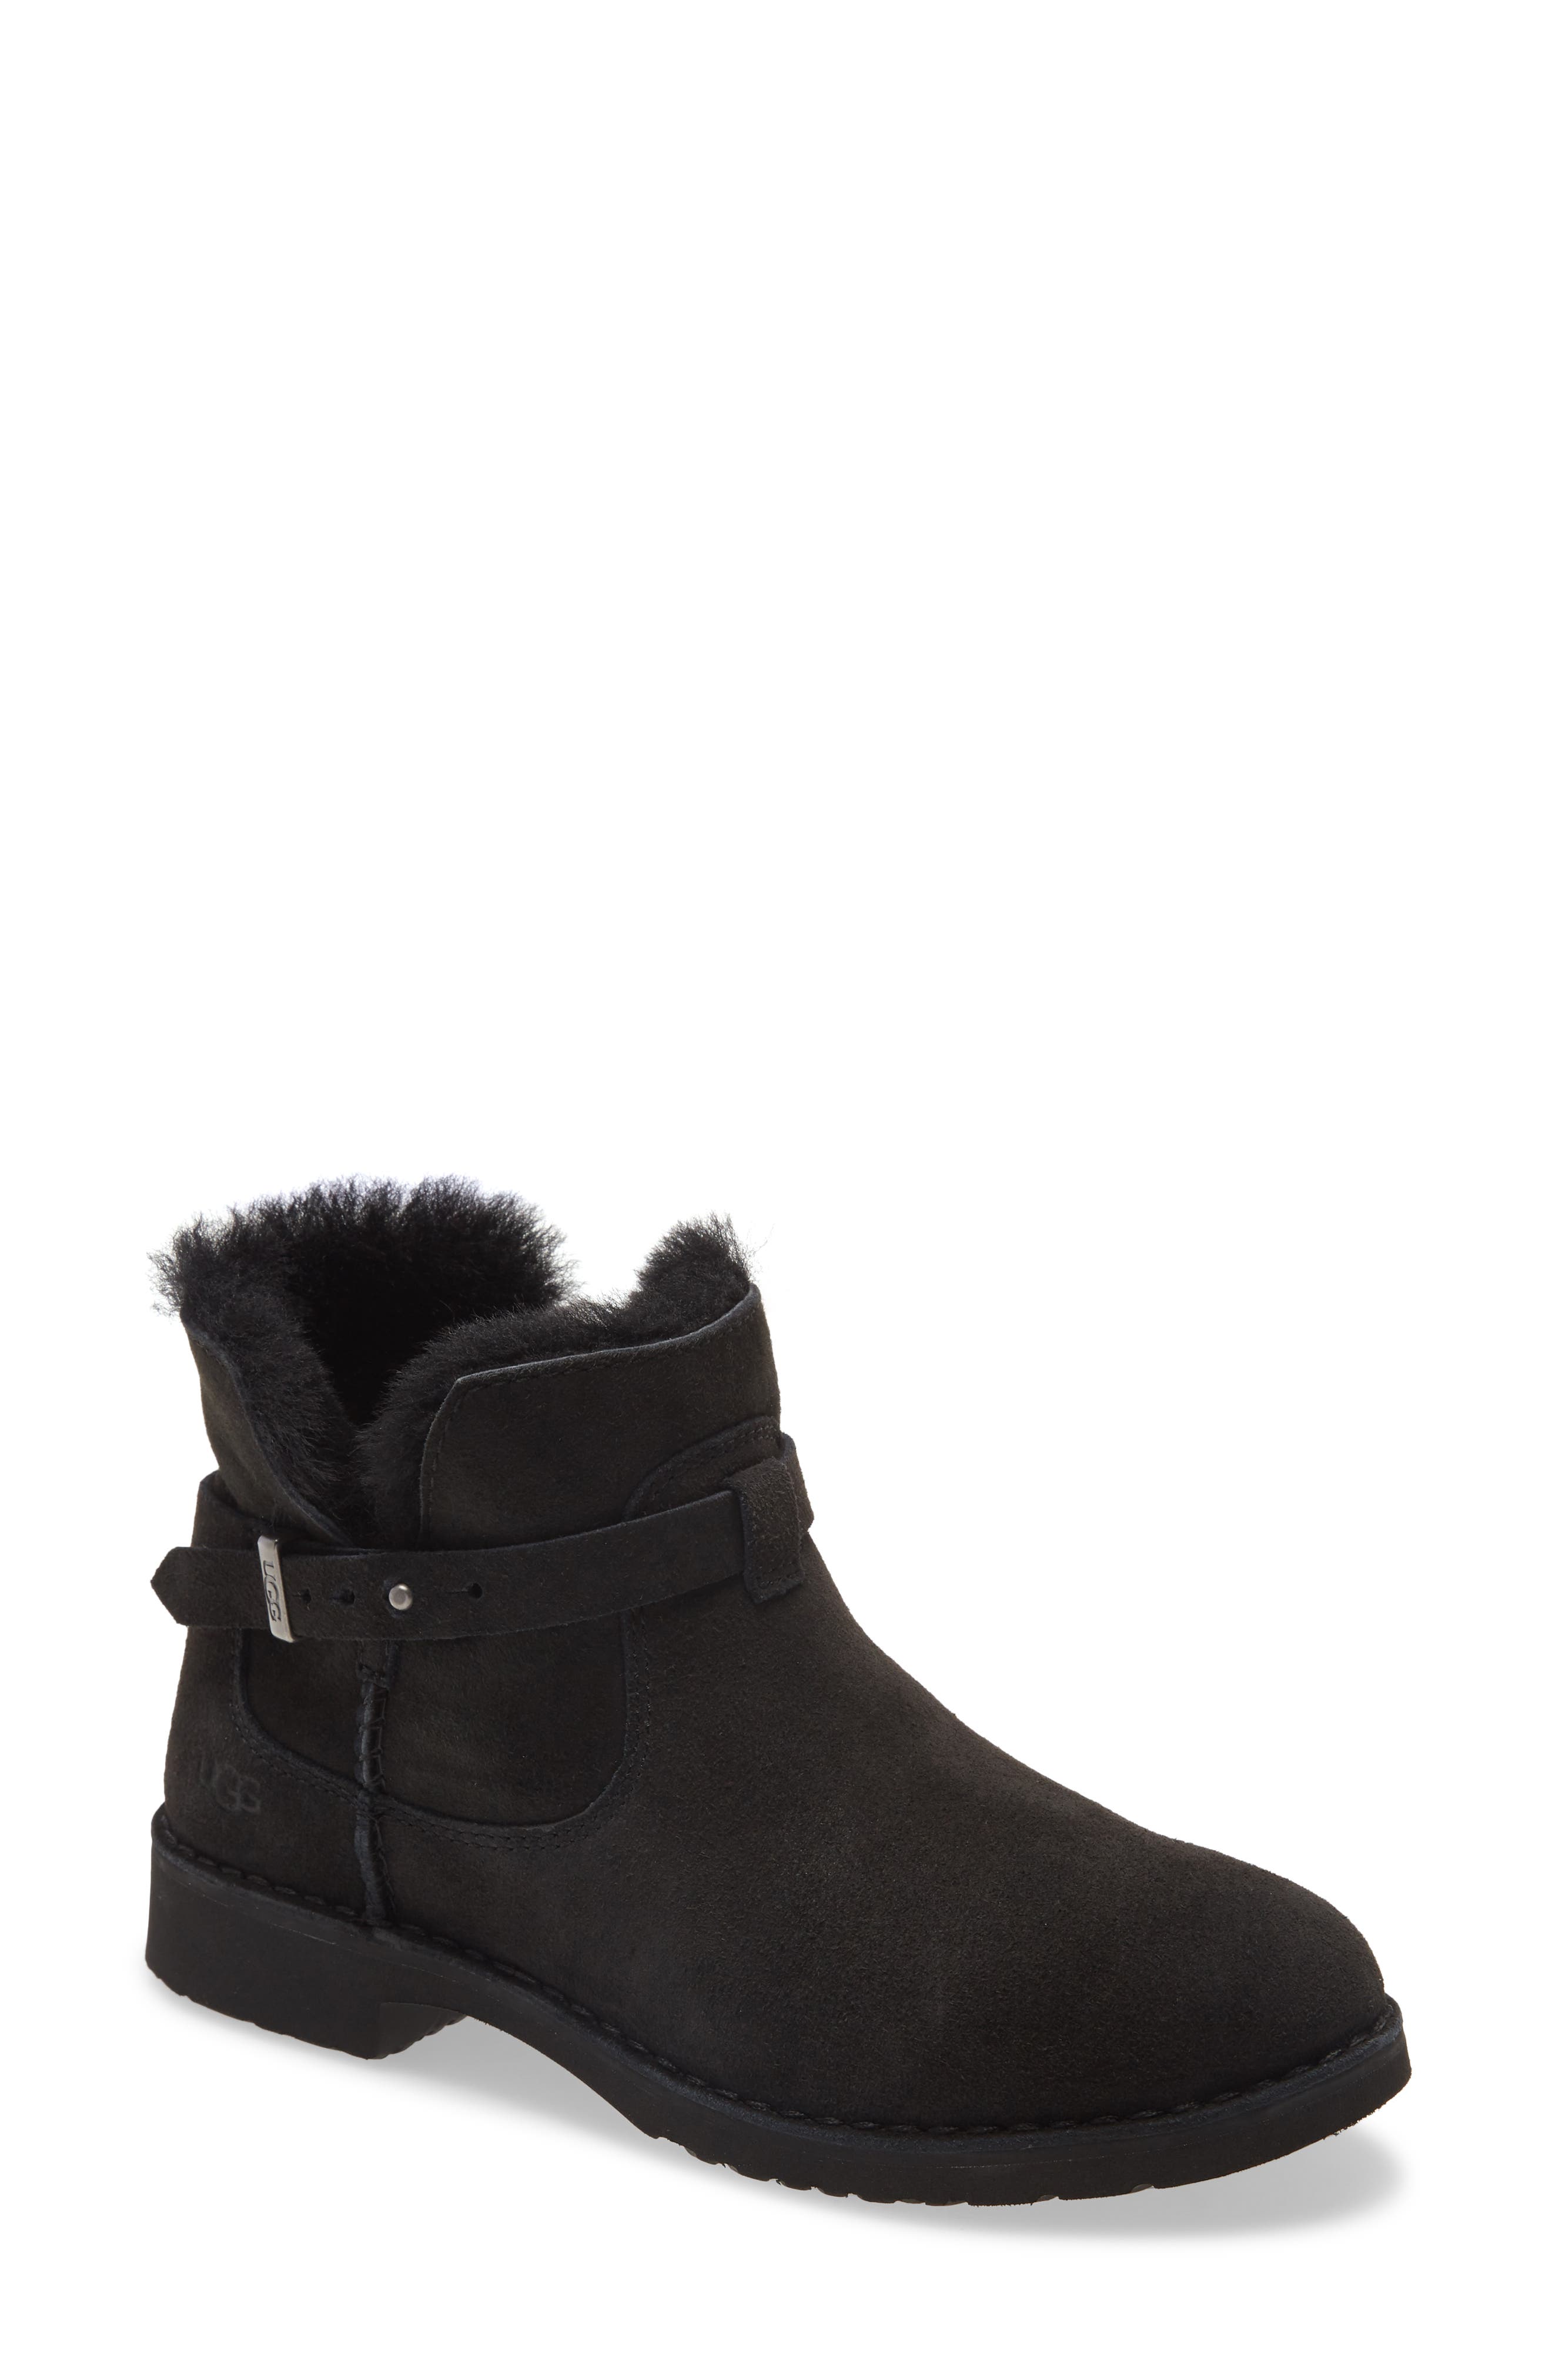 women's ugg slippers clearance